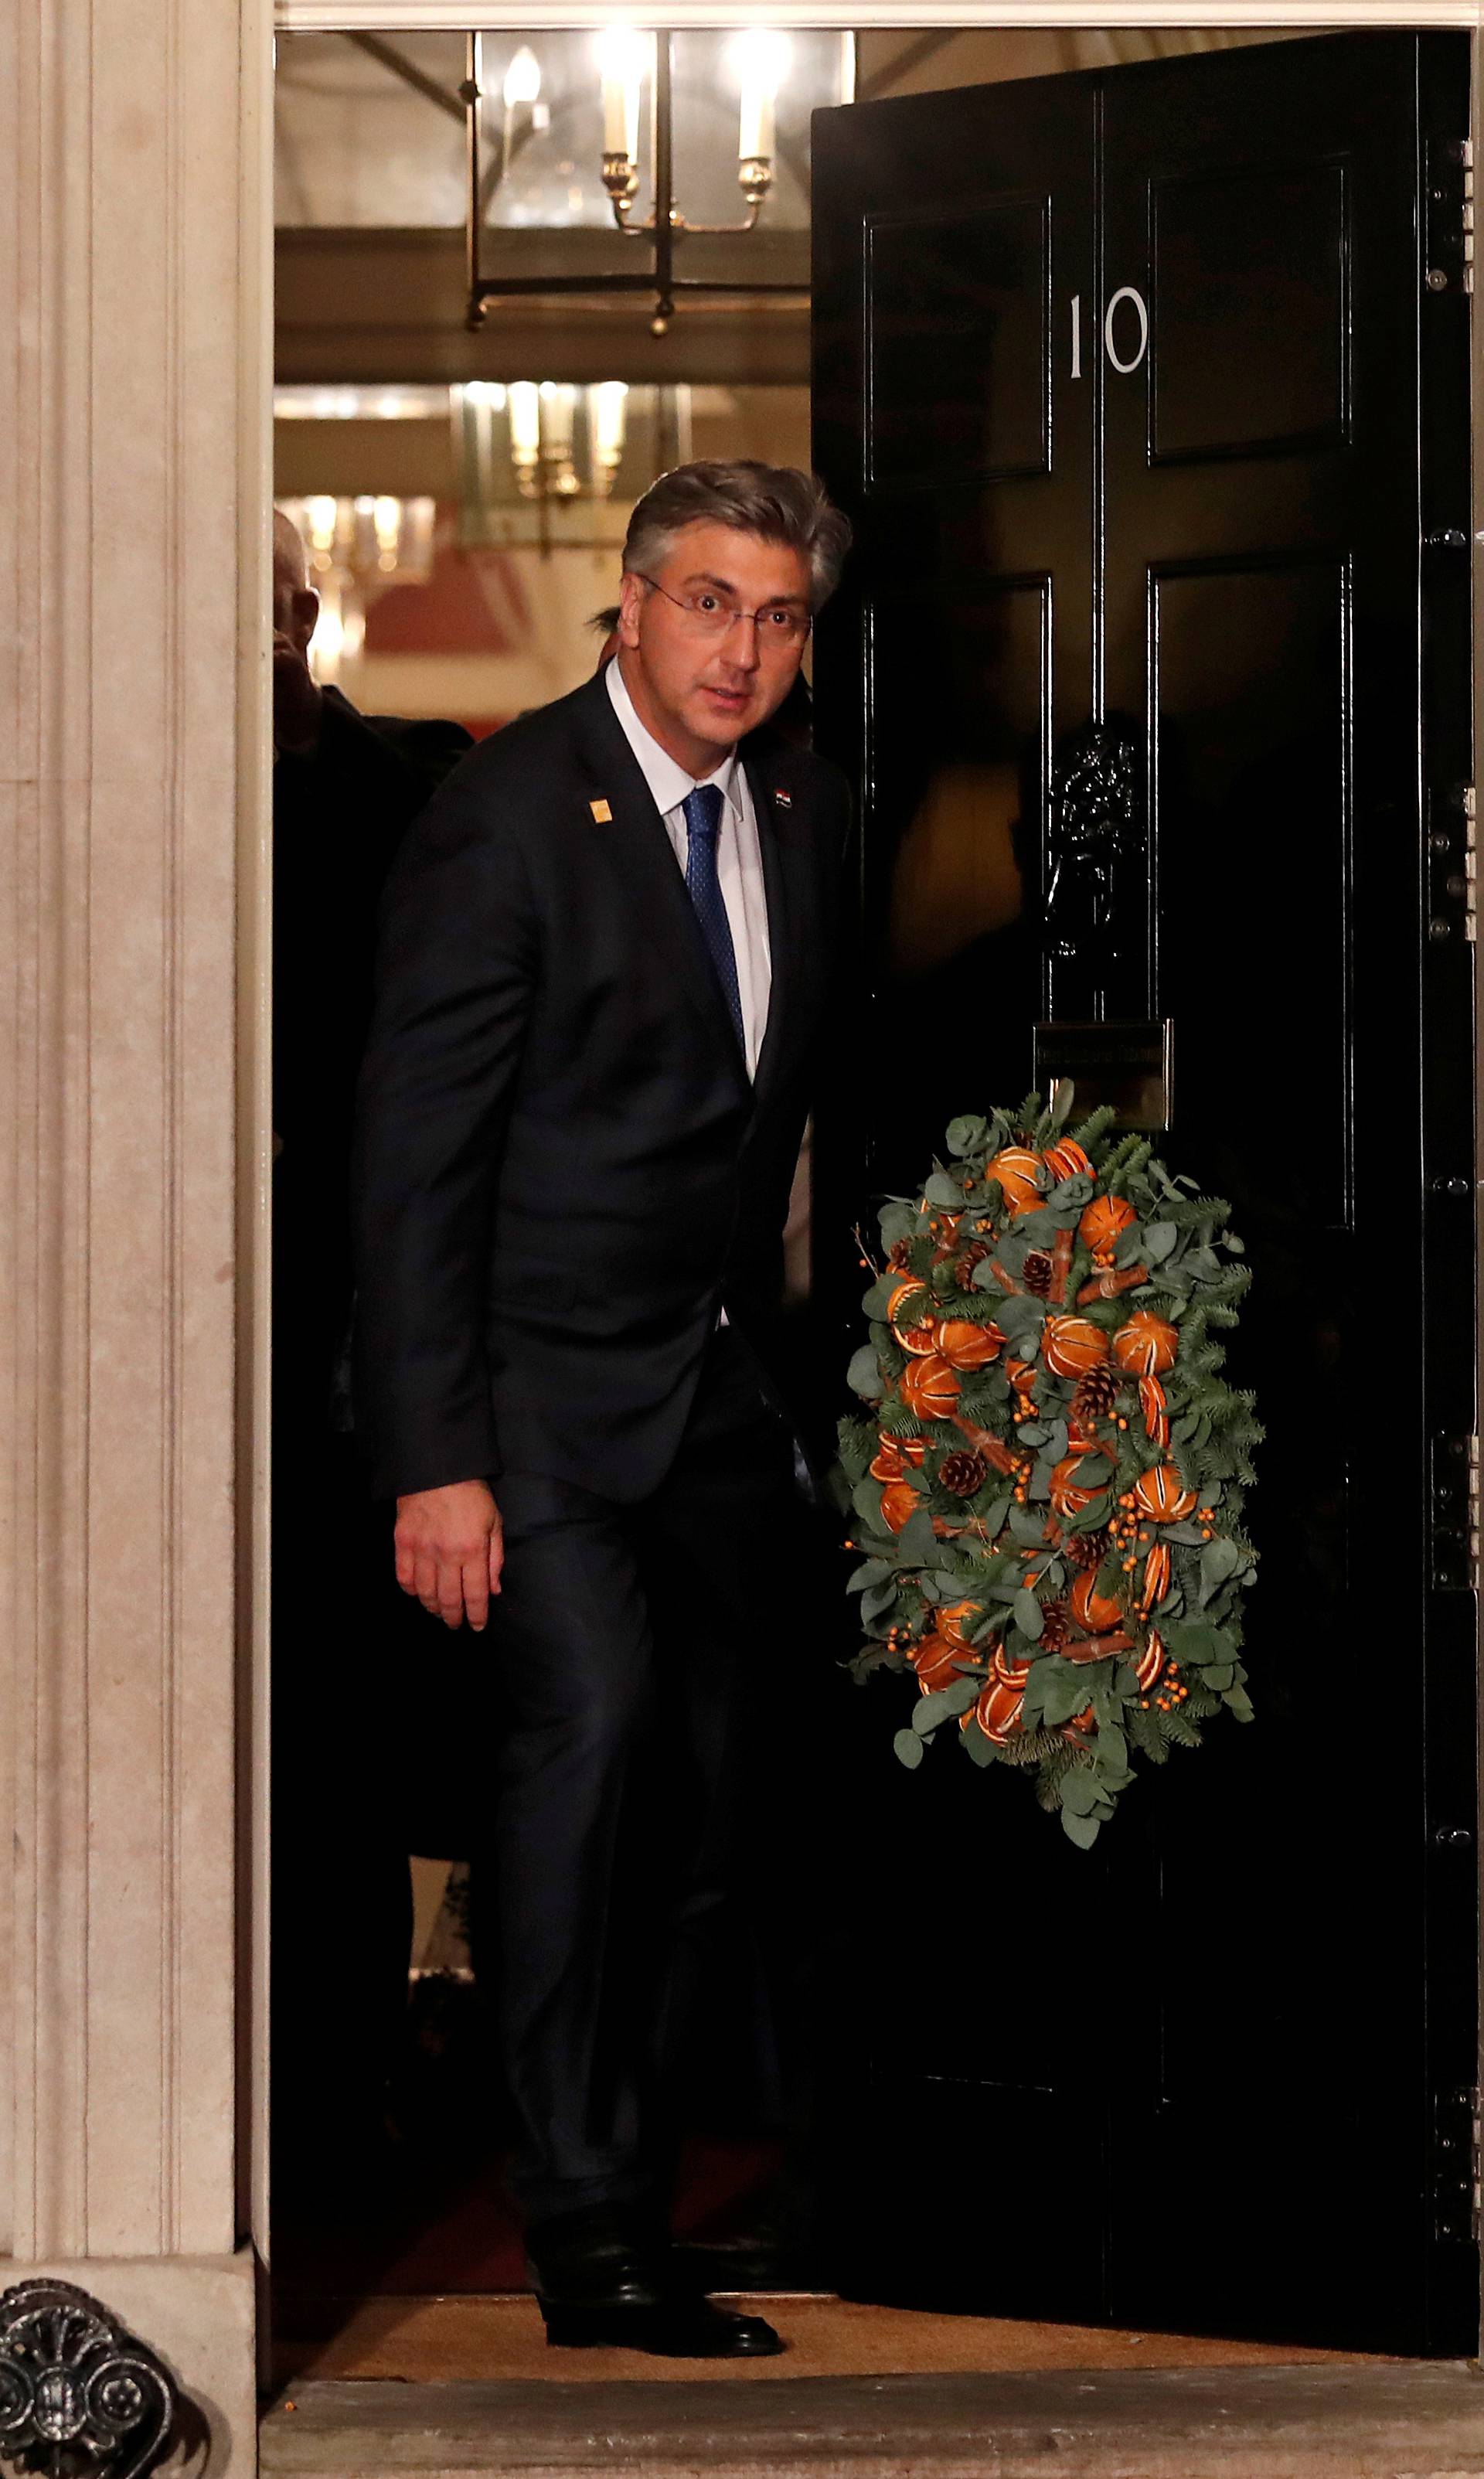 NATO leaders leave a reception at Downing Street, in London